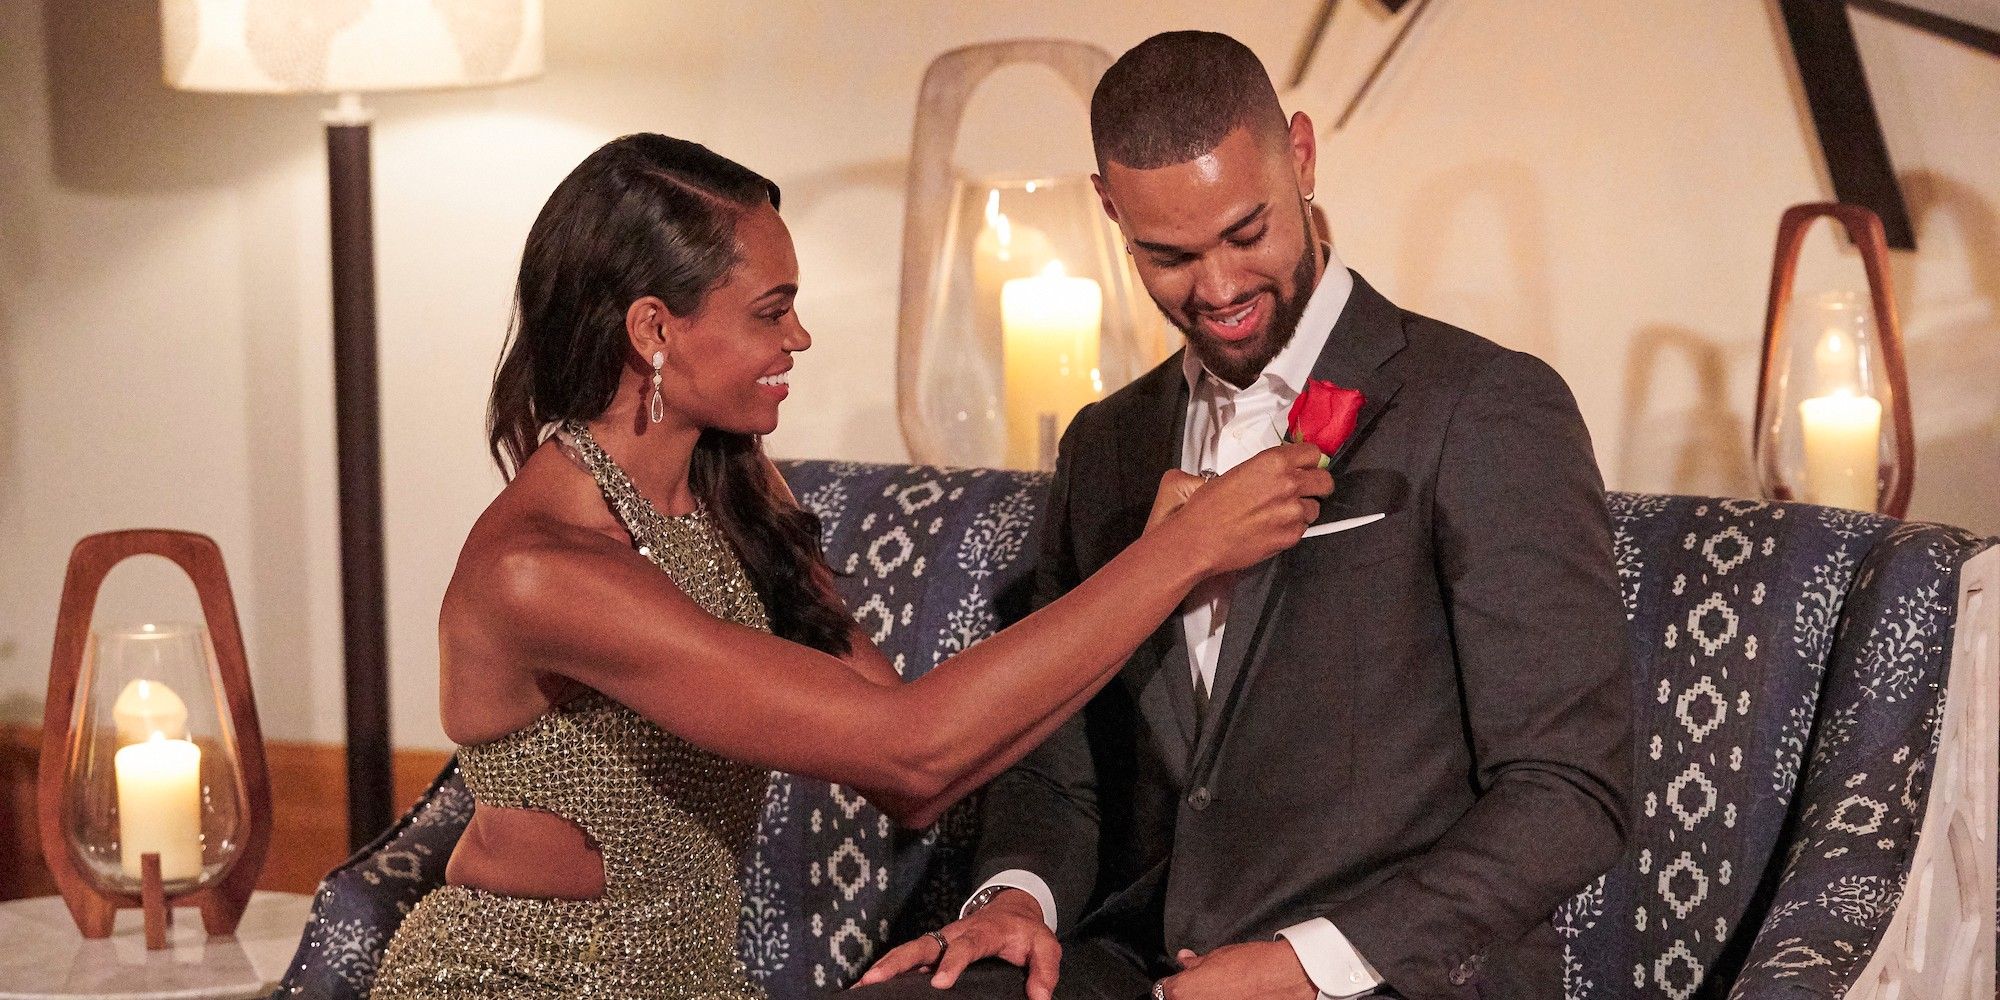 The Bachelorette season 18 Michelle Young and Nayte